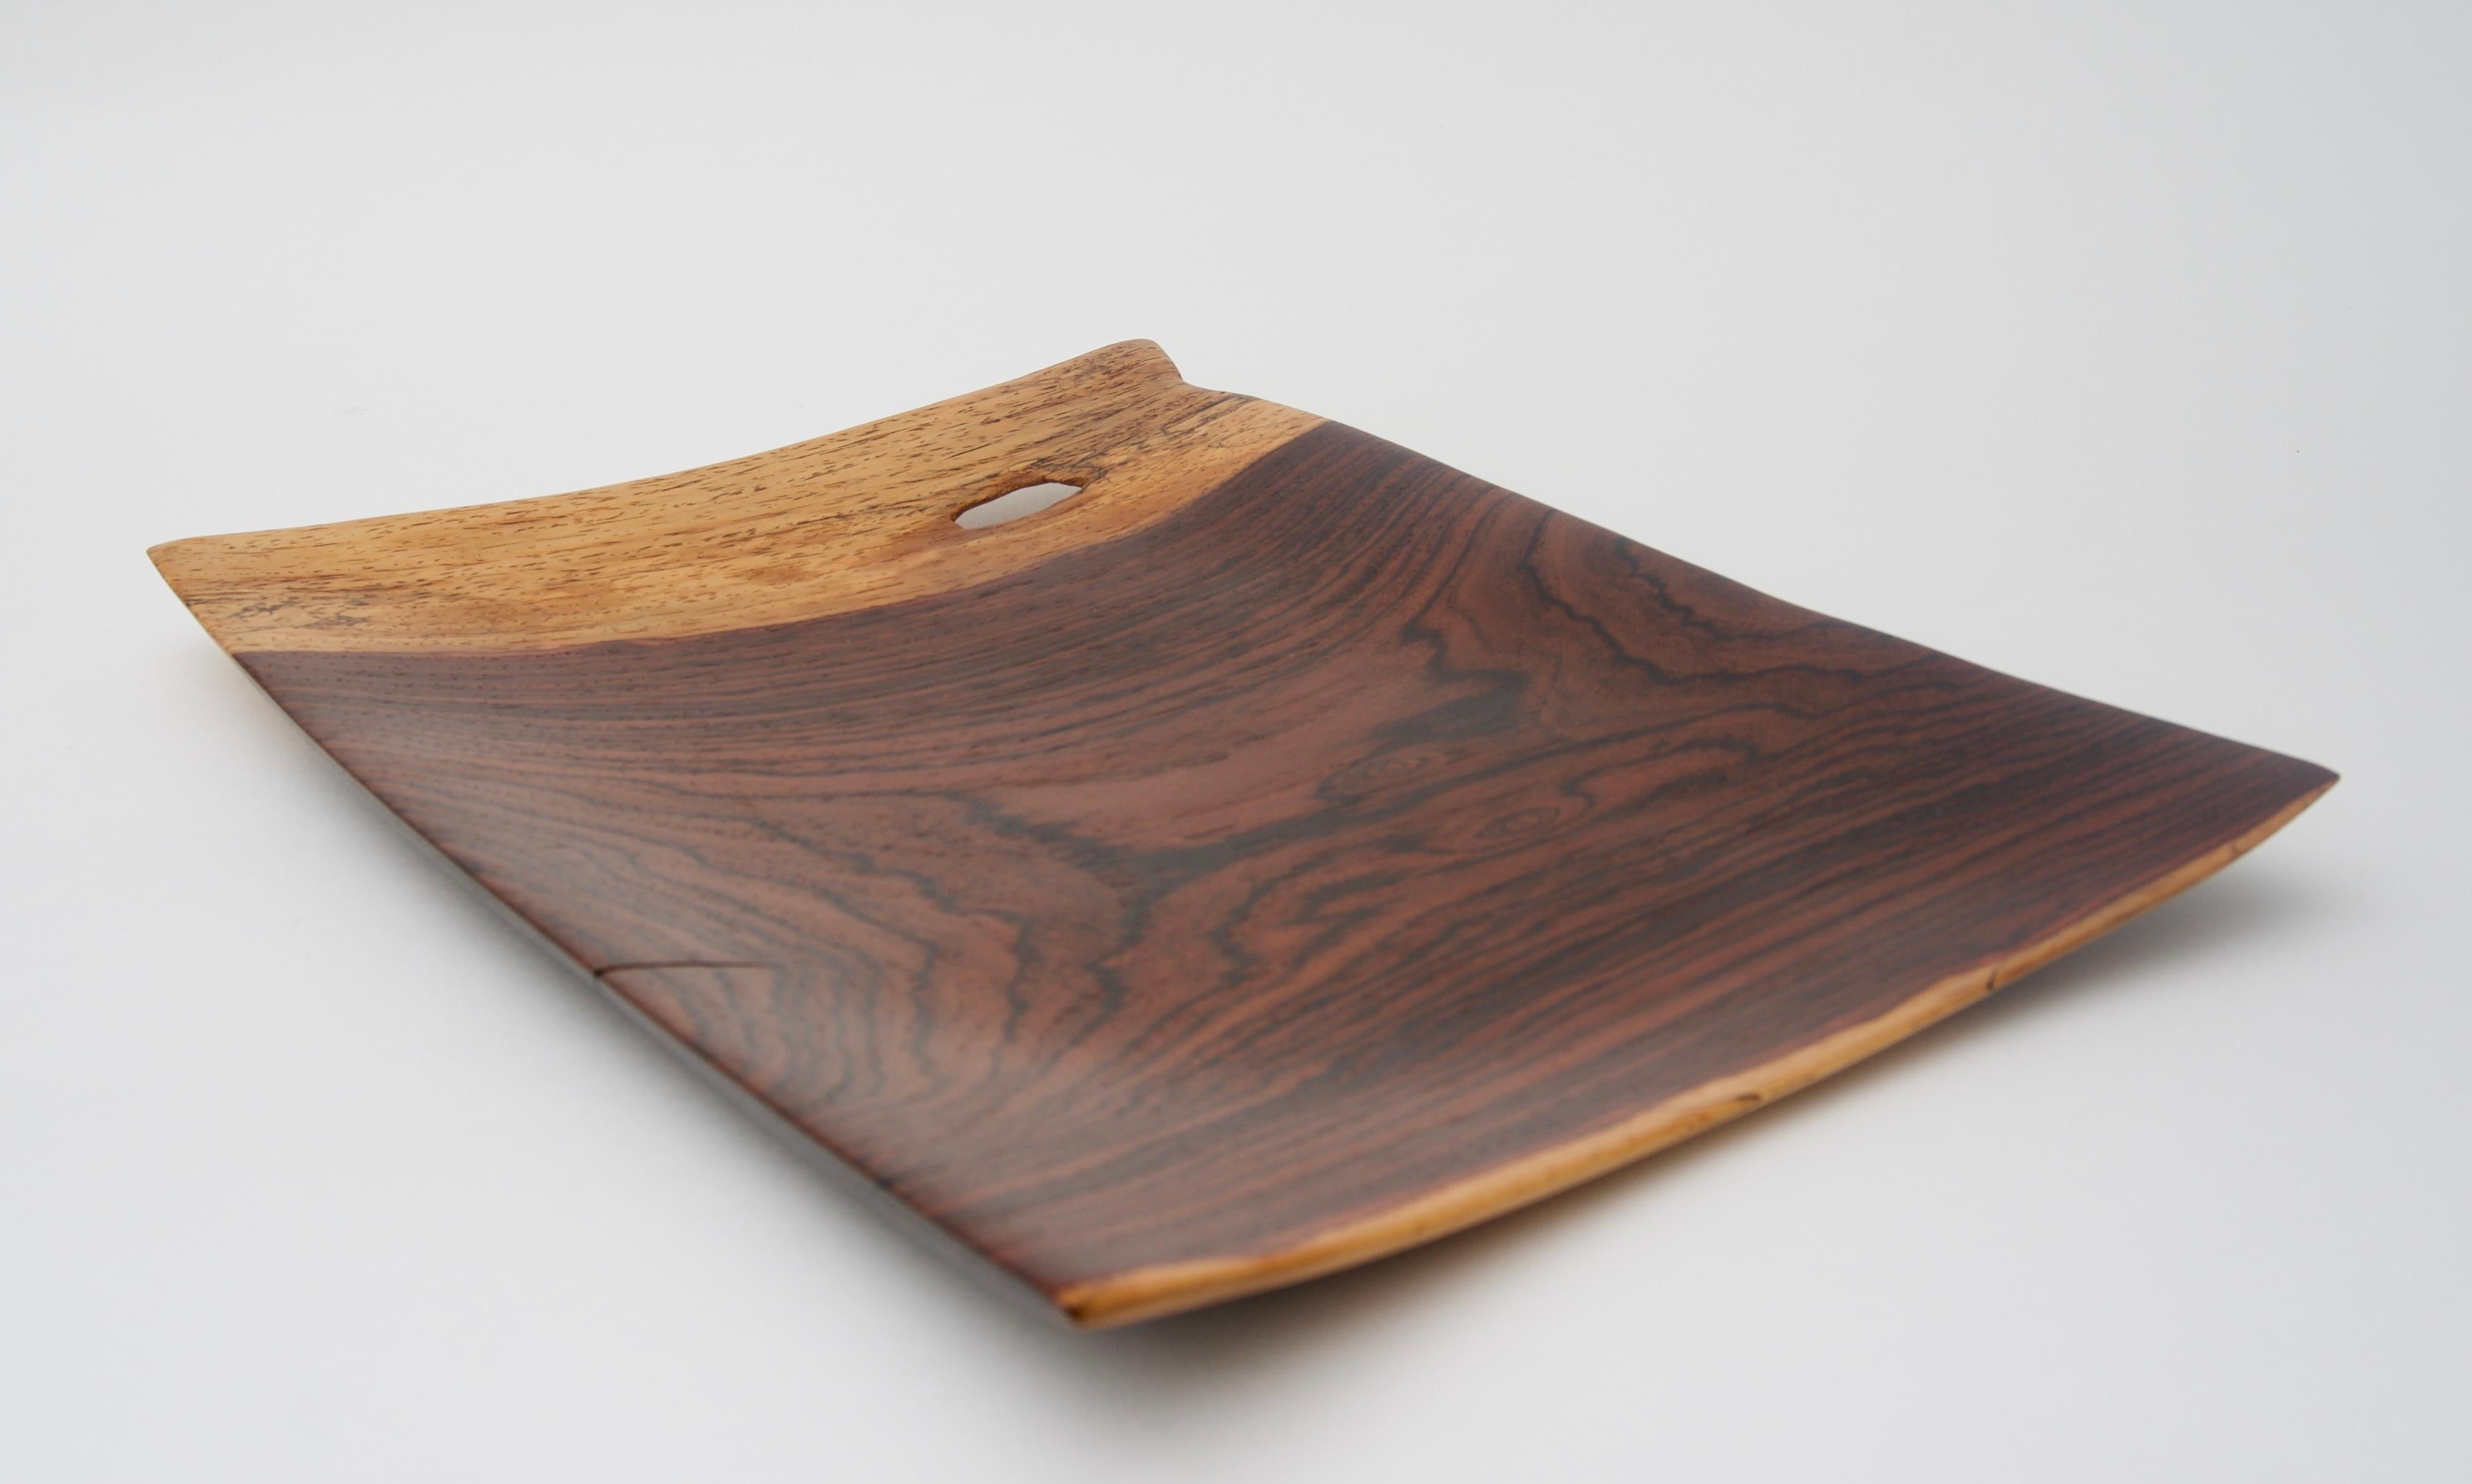 This stylish and chic organic tray is fabricated by hand in cocobolo wood and could be used to hold you keys, rings or perhaps as an hors d' ouvres plate.

FYI:
Cocobolo is a tropical hardwood of Central American trees[1] belonging to the genus